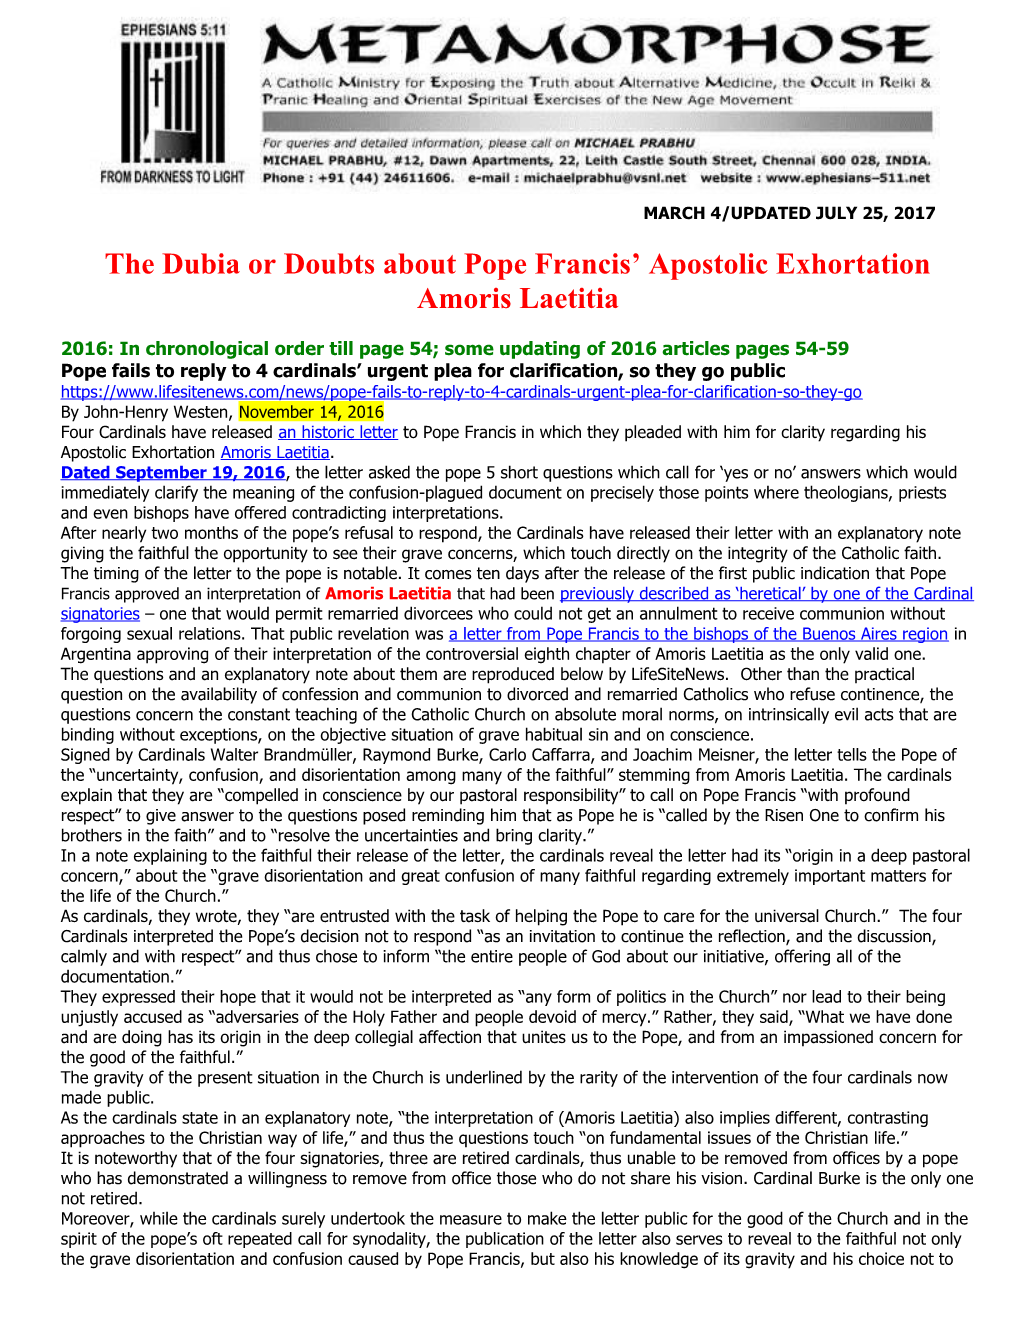 The Dubia Or Doubts About Pope Francis Apostolic Exhortation Amoris Laetitia